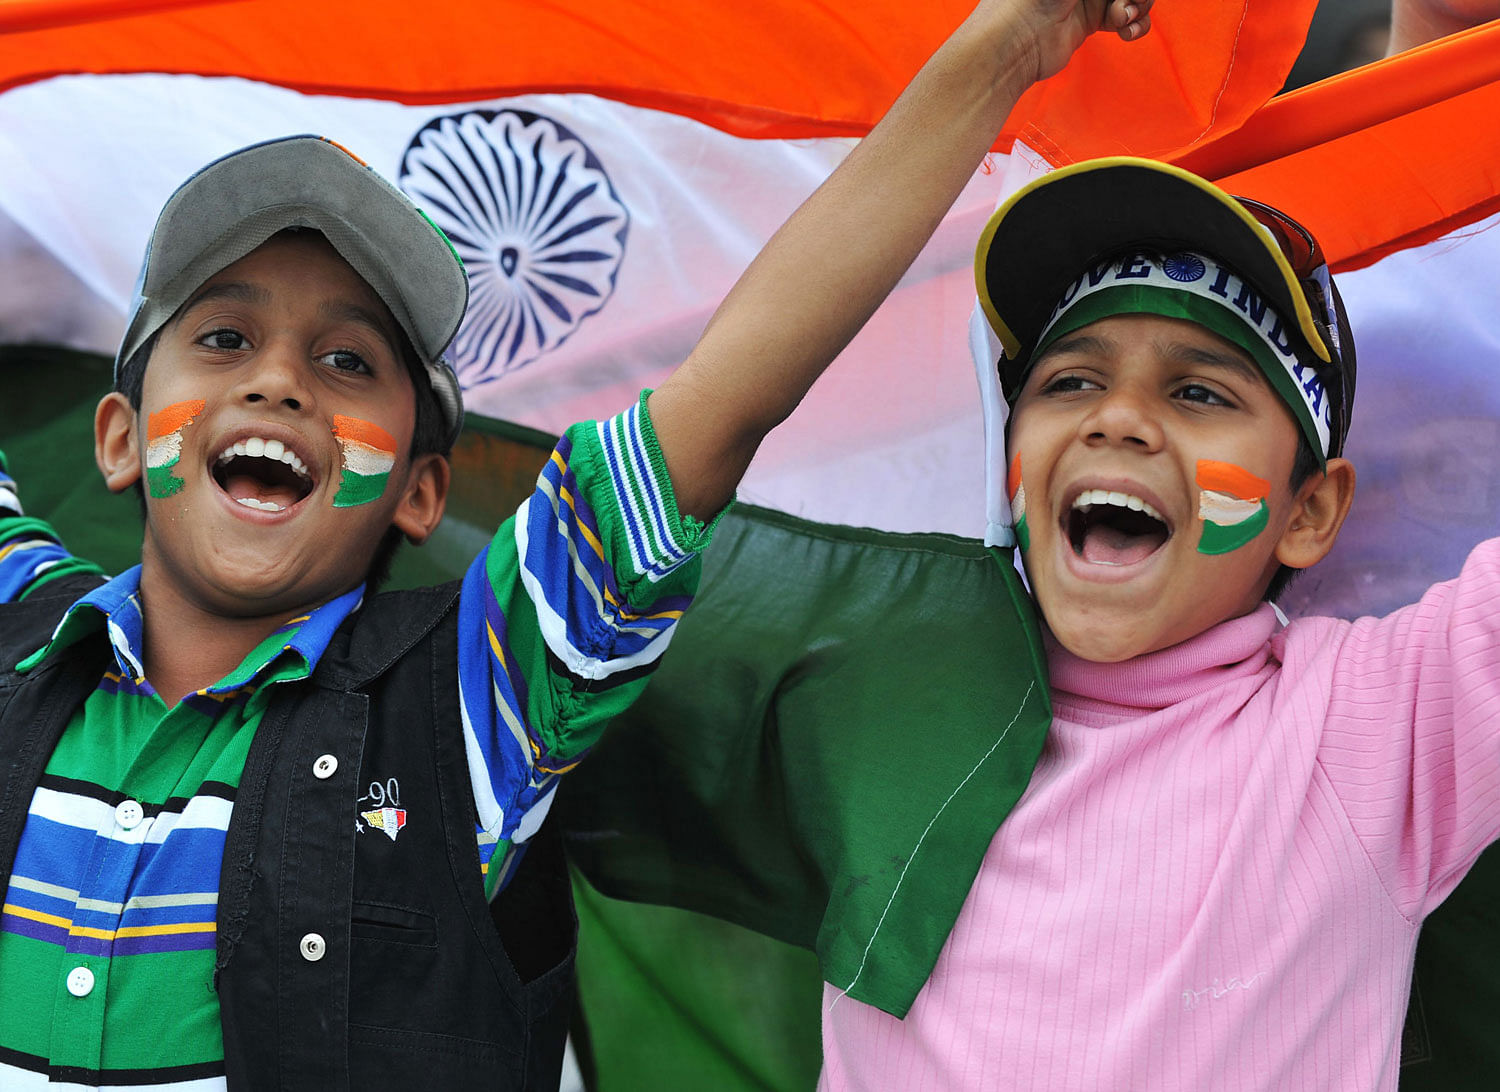 Indian cricket fans cheer during the fourth day of the first Test cricket match between India and New Zealand at the Rajiv Gandhi International cricket stadium in Hyderabad on August 26, 2012. AFP PHOTO/ Noah SEELAM